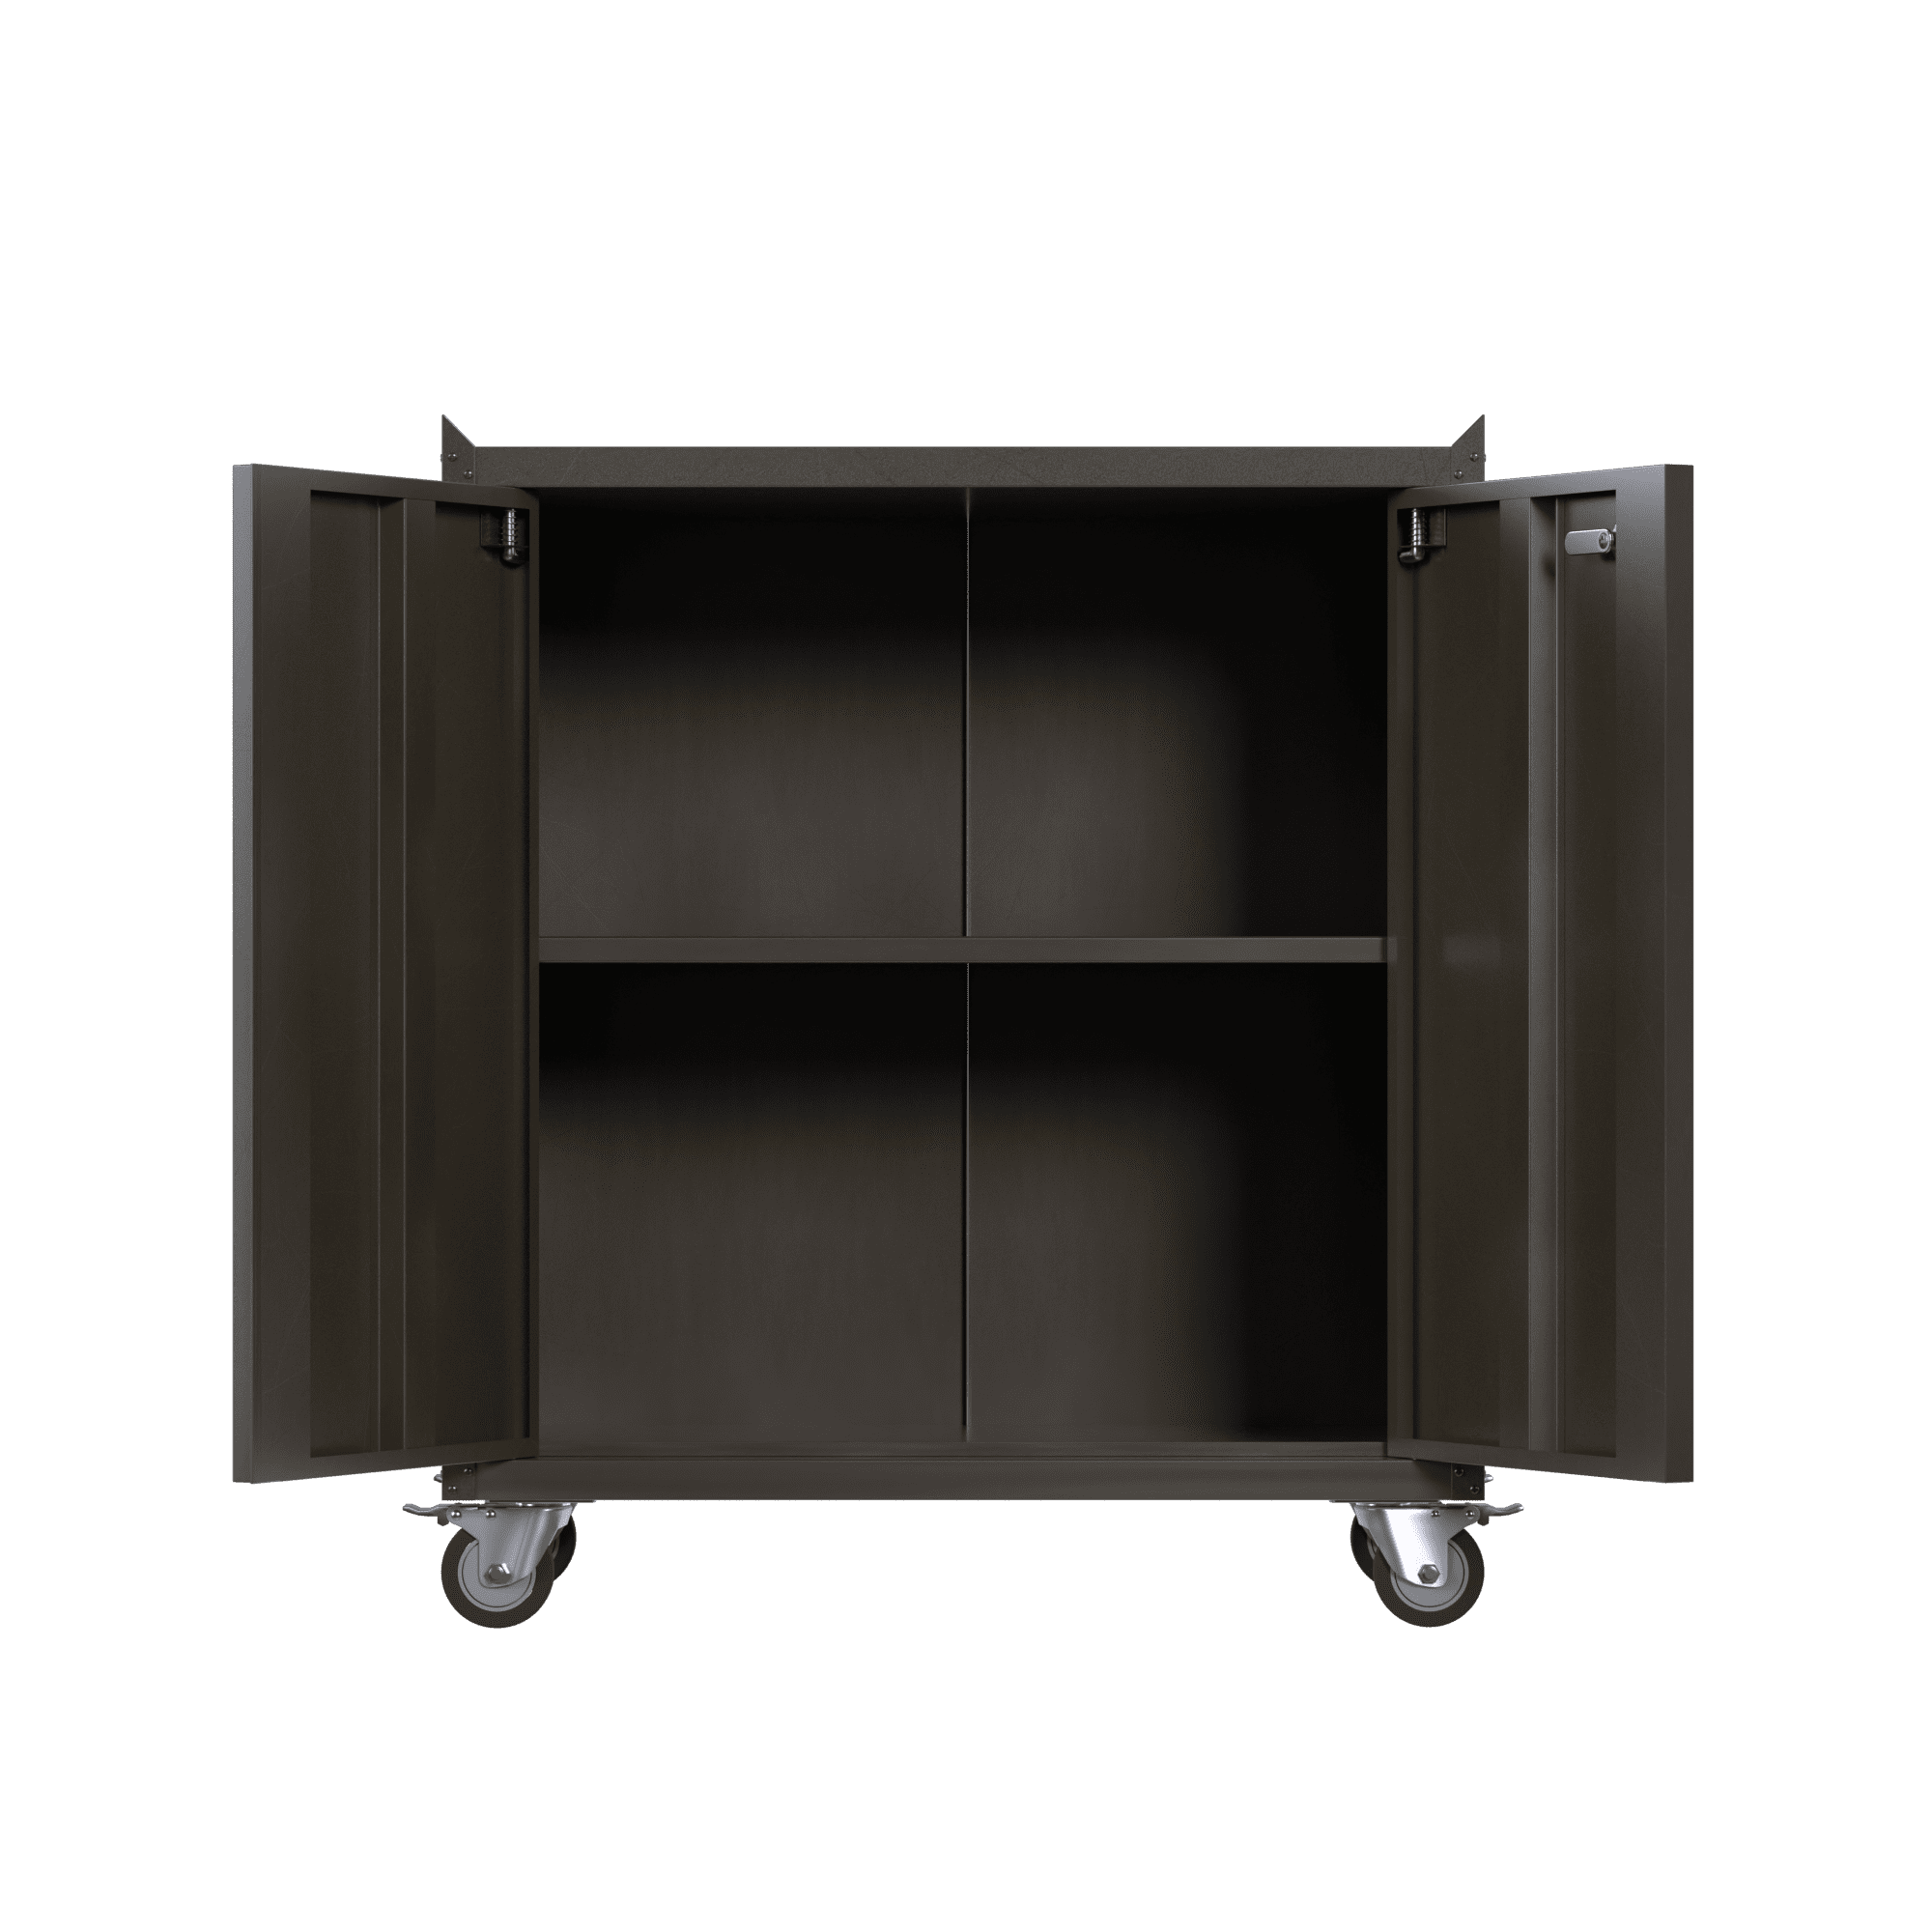 GangMei Metal Wall Storage Cabinet, Hanging Garage Cabinets with Up-Flip  Doors for Home Office Basement Pantry School and Workshop